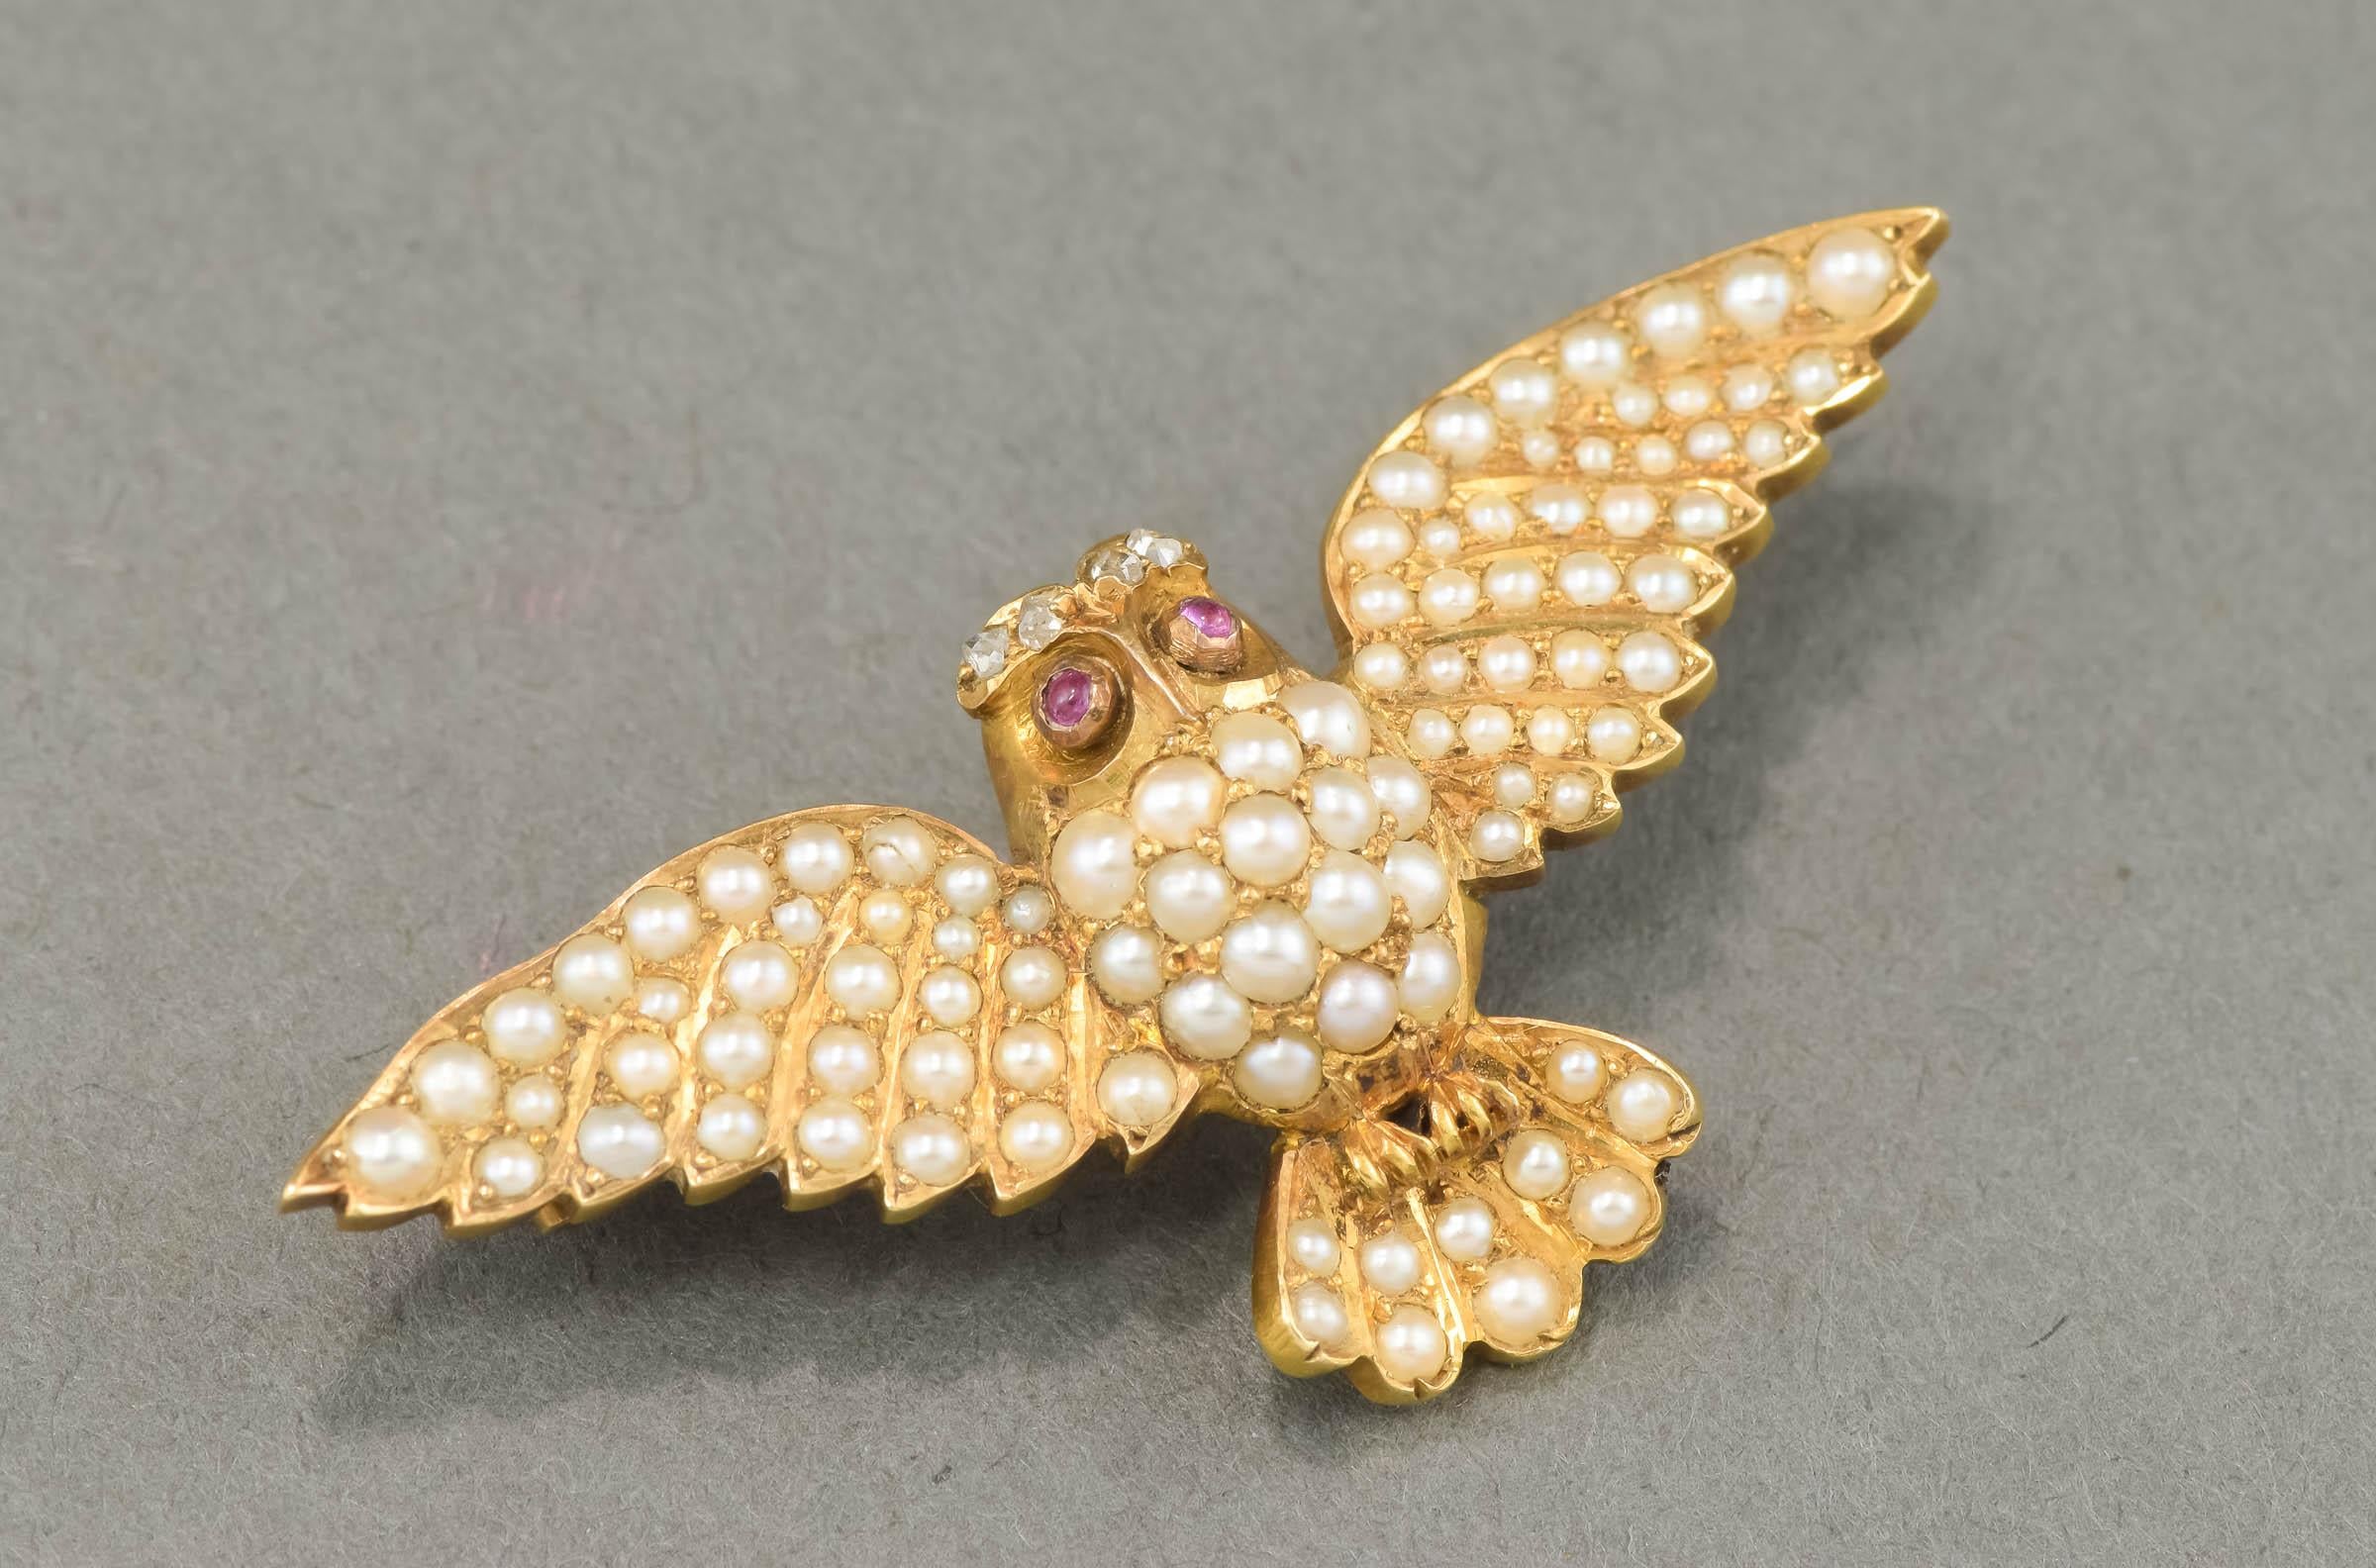 Antique Flying Owl Brooch Pin with Diamond & Pearls 6